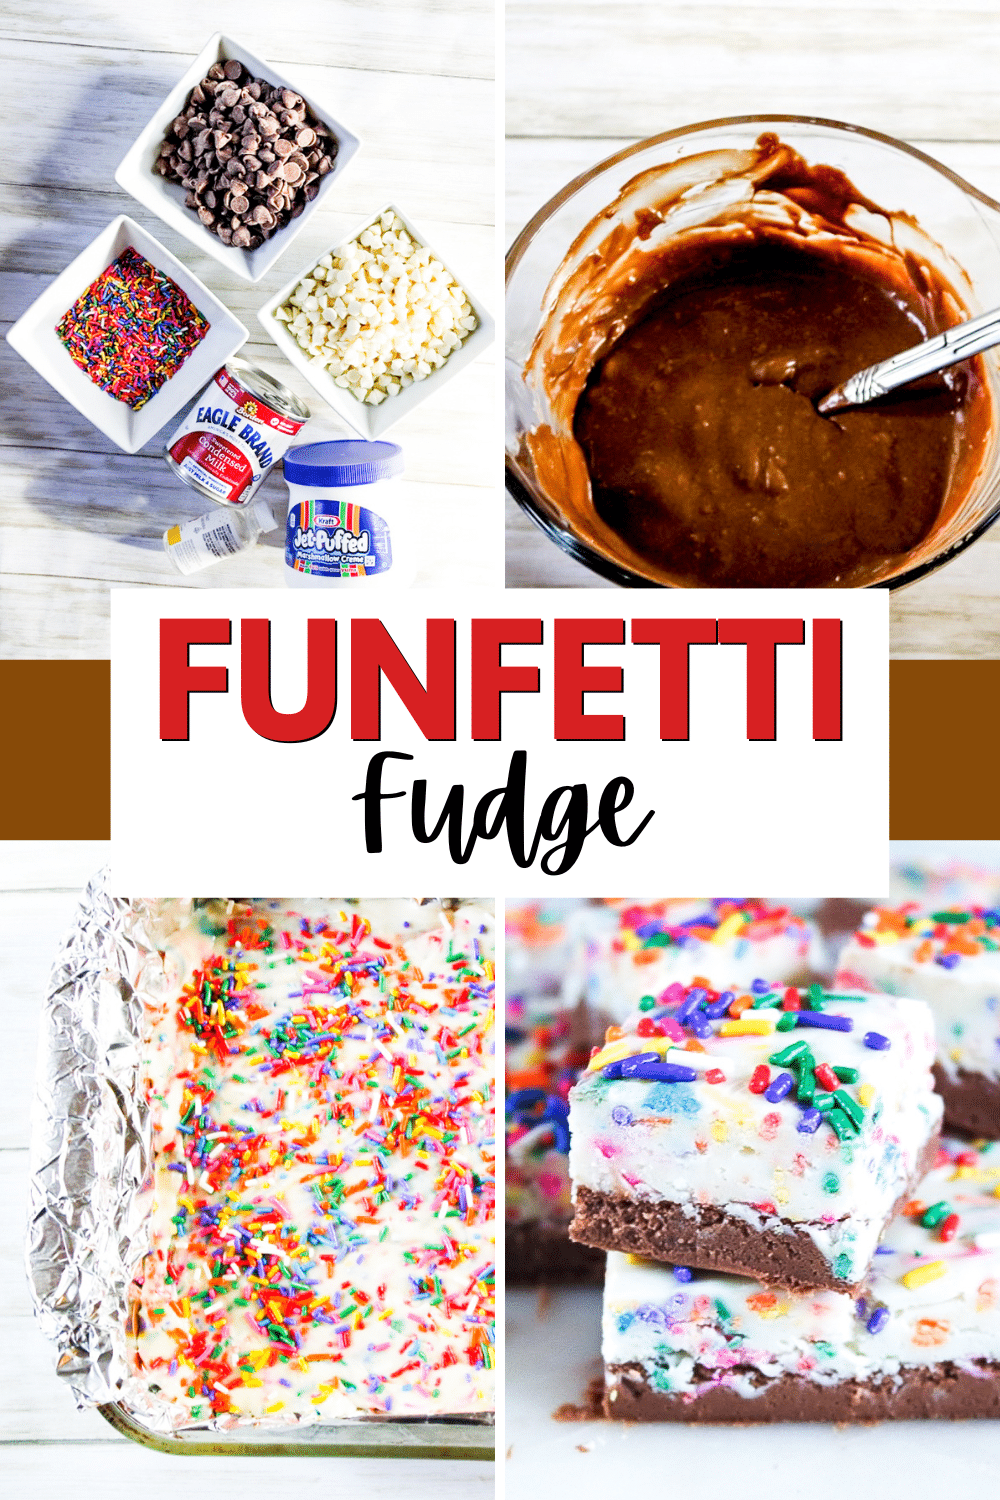 Delicious fudge with colorful sprinkles.